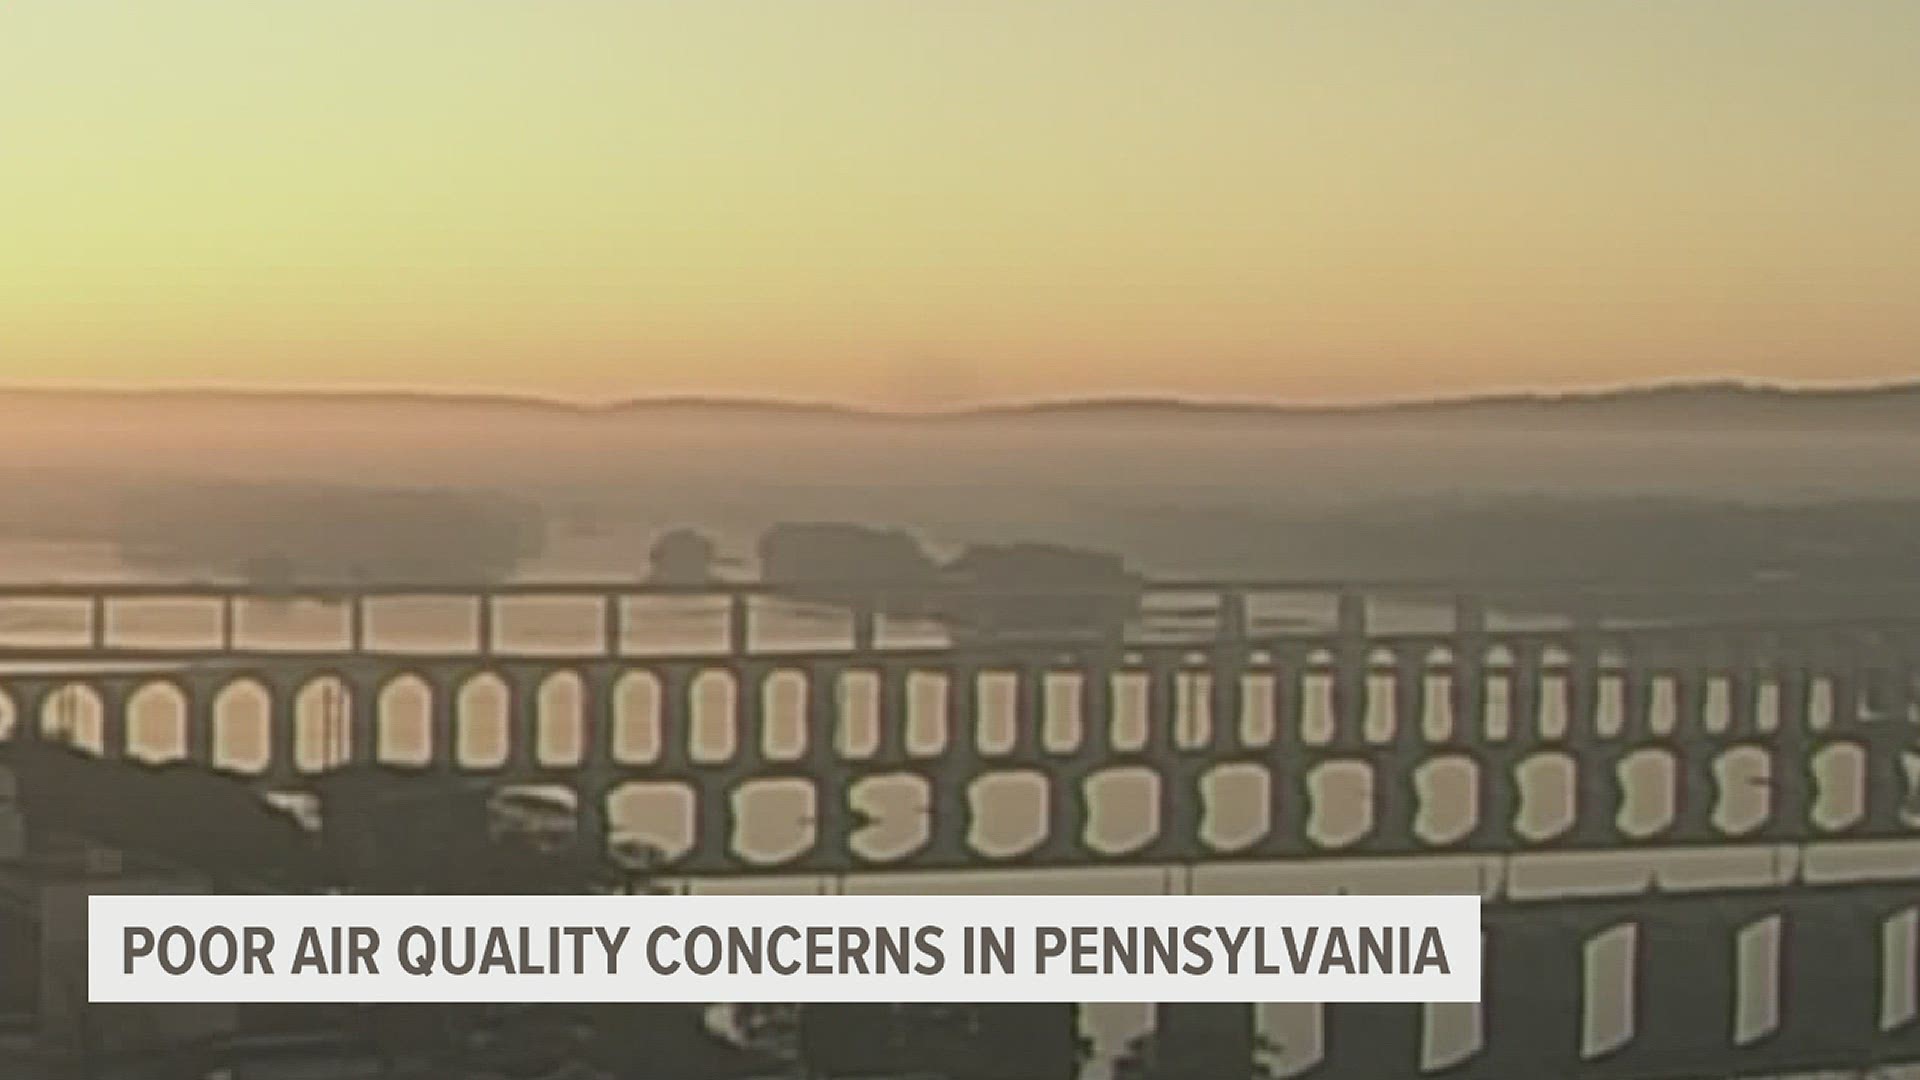 The recent nice weather has led to some of the poorest air quality Central PA has seen in over a decade.